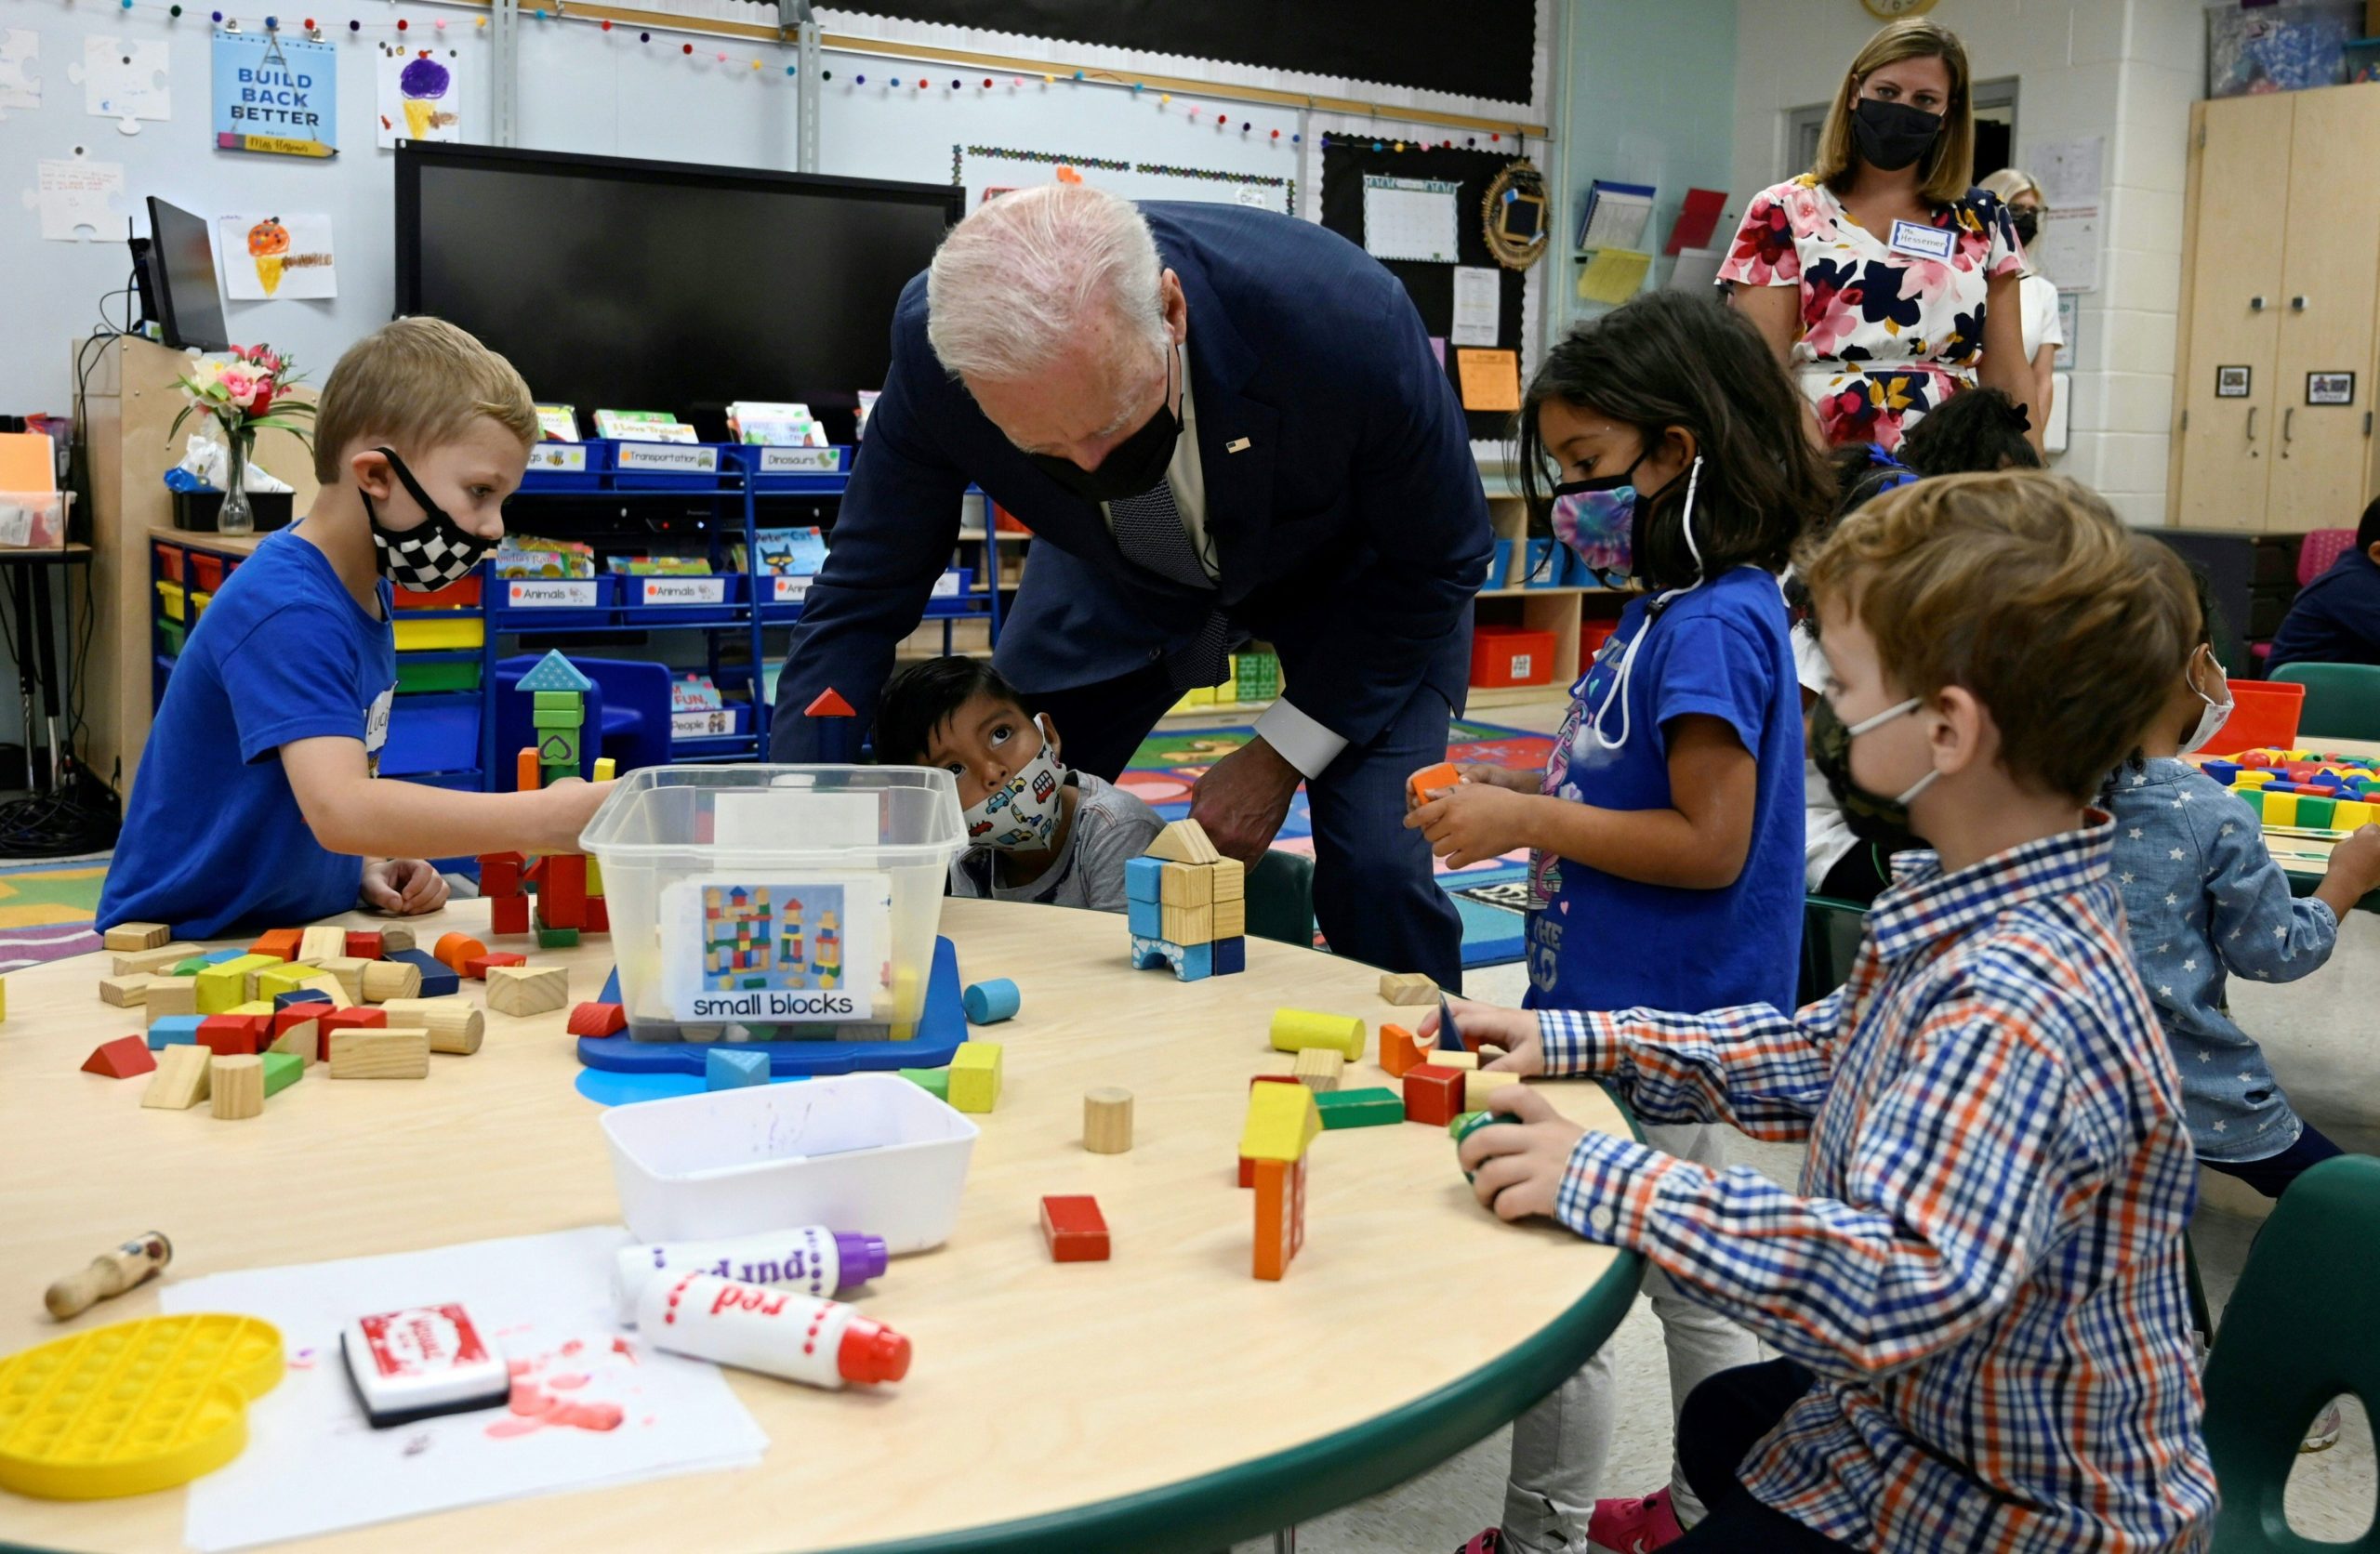 US president Joe Biden talks to students during a visit to a pre-k classroom at East End elementary school in North Plainfield, New Jersey to promote his build back better agenda on October 25, 2021. (Photo by ANDREW CABALLERO-REYNOLDS / AFP) (Photo by ANDREW CABALLERO-REYNOLDS/AFP via Getty Images)